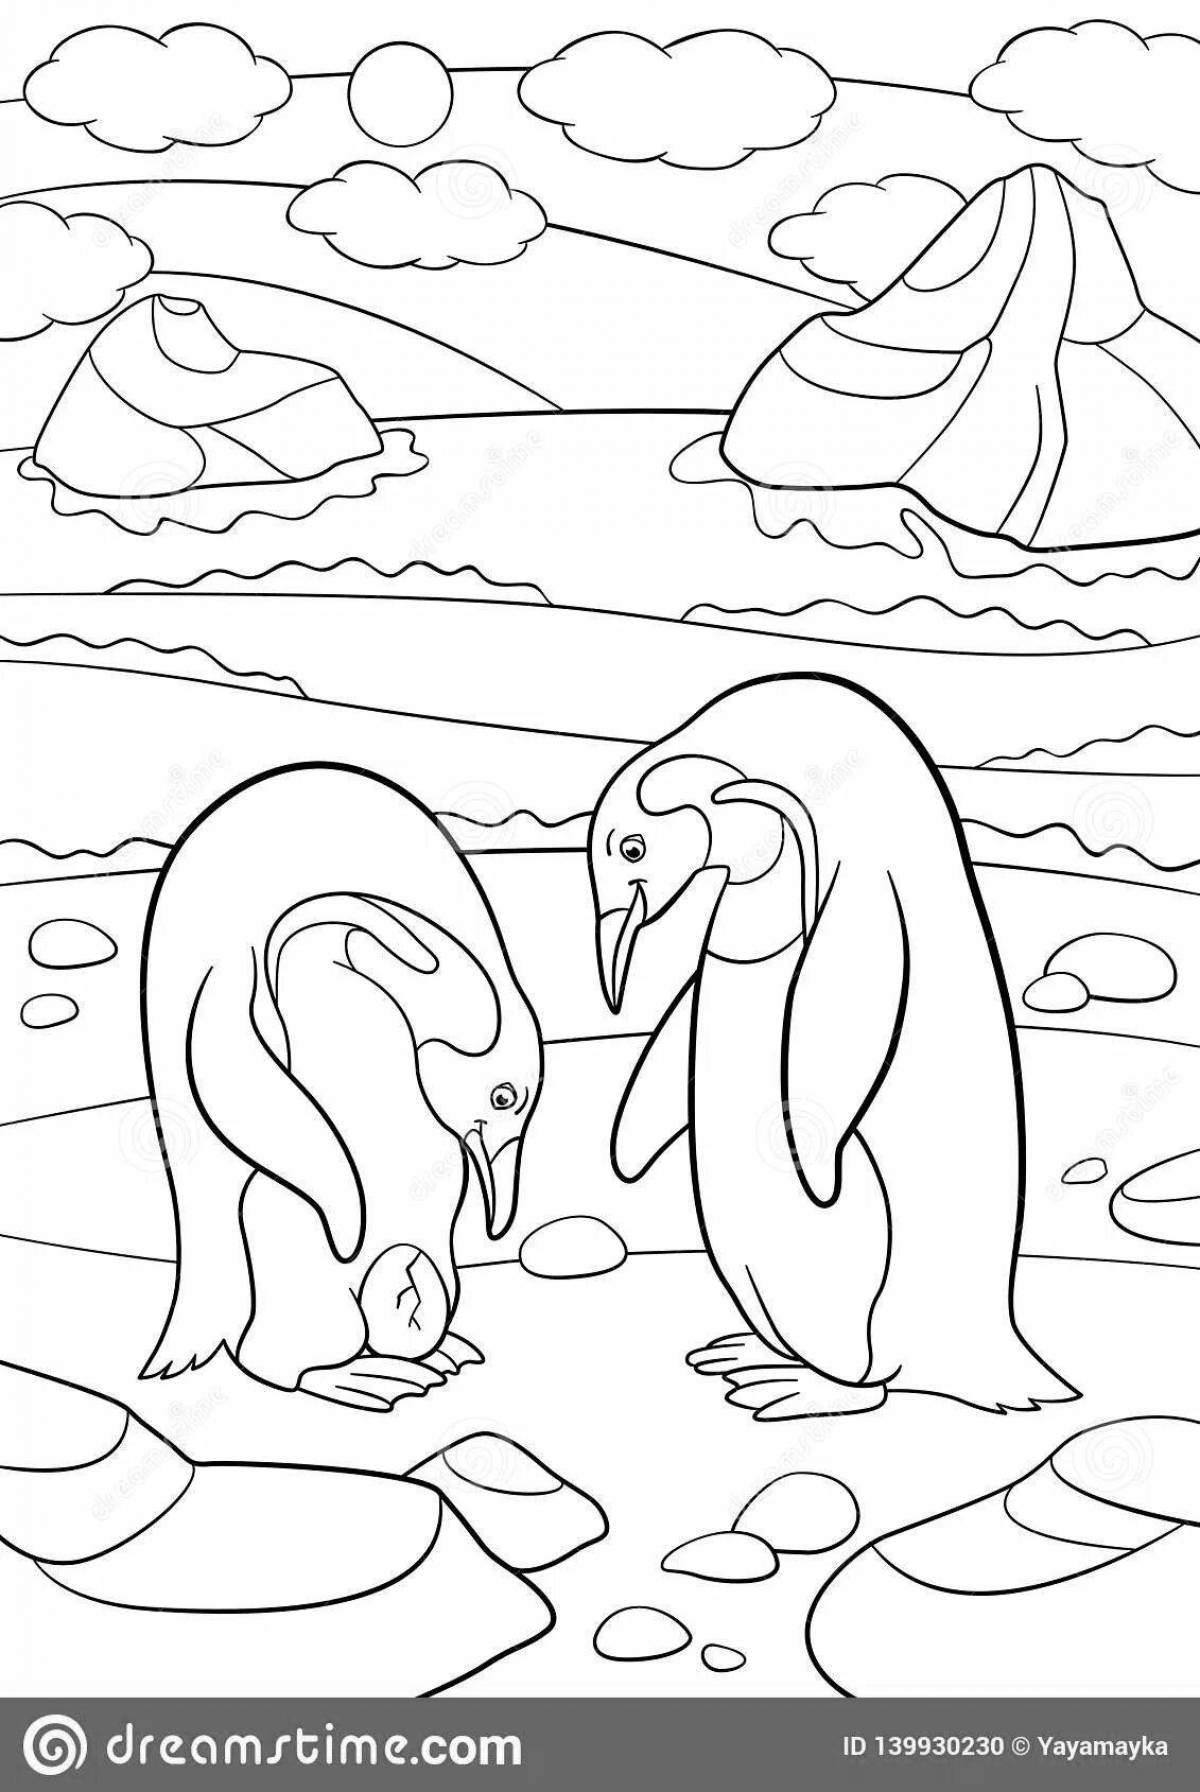 Impressive animals of antarctica coloring pages for kids